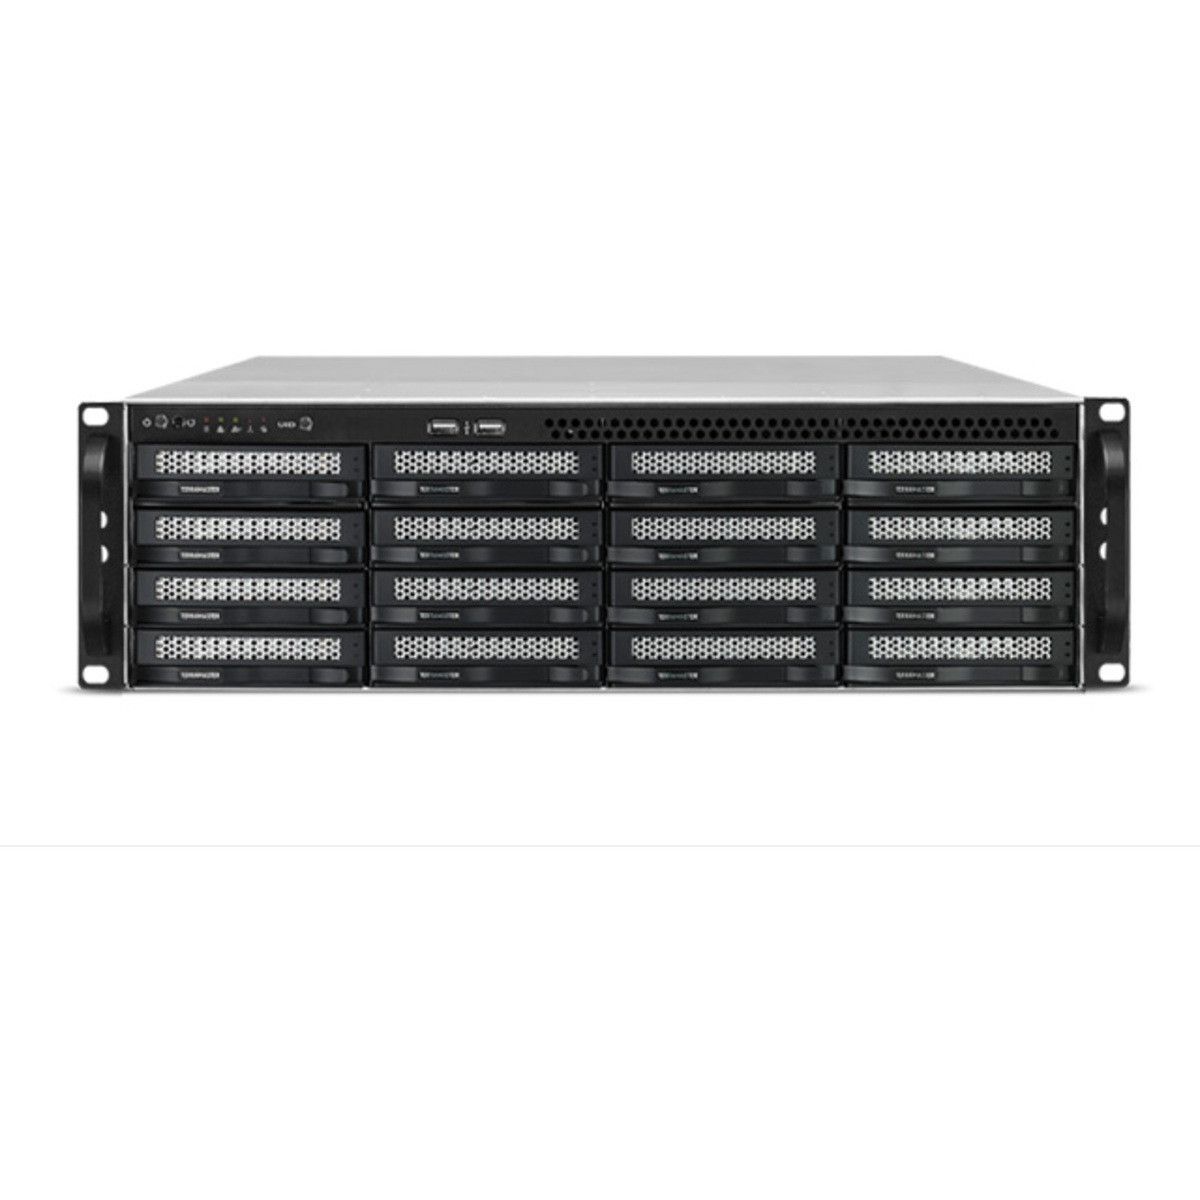 TerraMaster U16-722-2224 88tb 16-Bay RackMount Large Business / Enterprise NAS - Network Attached Storage Device 11x8tb TeamGroup EX2 Elite T253E2008T0C101 2.5 550/520MB/s SATA 6Gb/s SSD CONSUMER Class Drives Installed - Burn-In Tested U16-722-2224